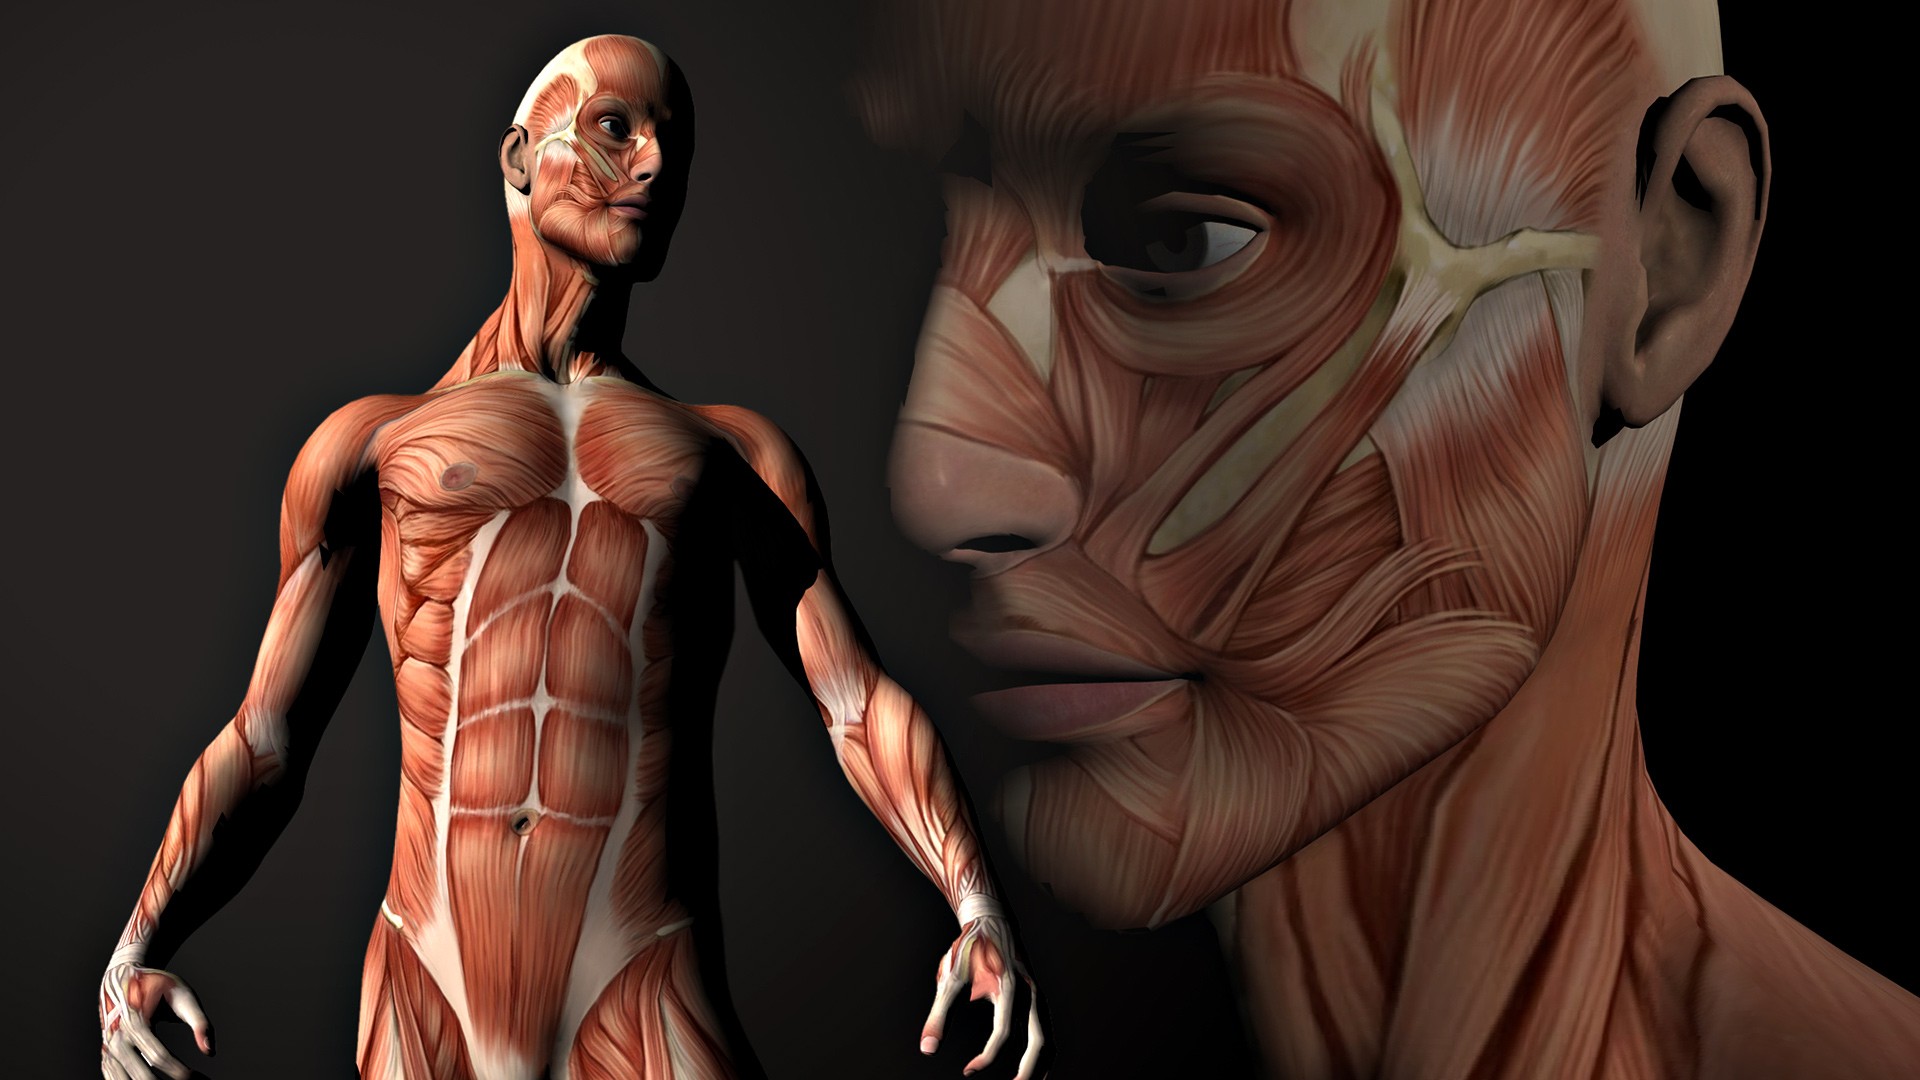 50+ Artistic Anatomy HD Wallpapers and Backgrounds